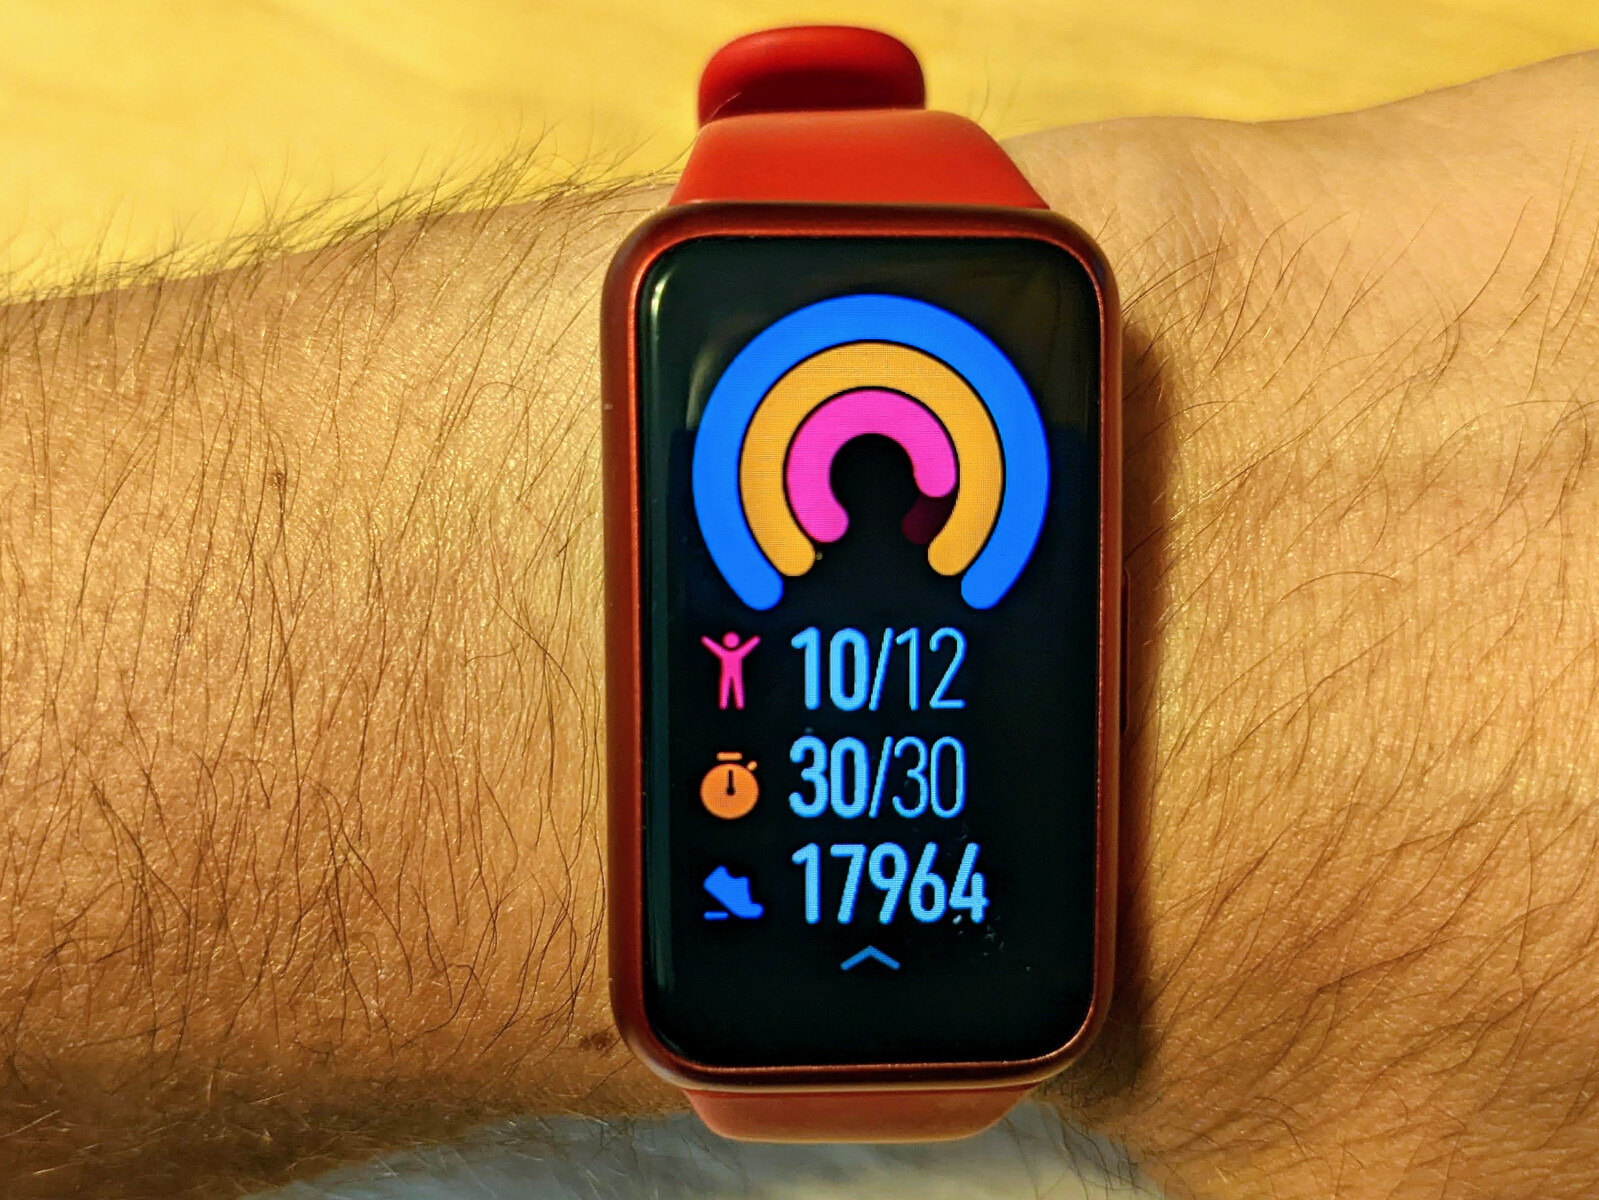 Honor Band 7 Review